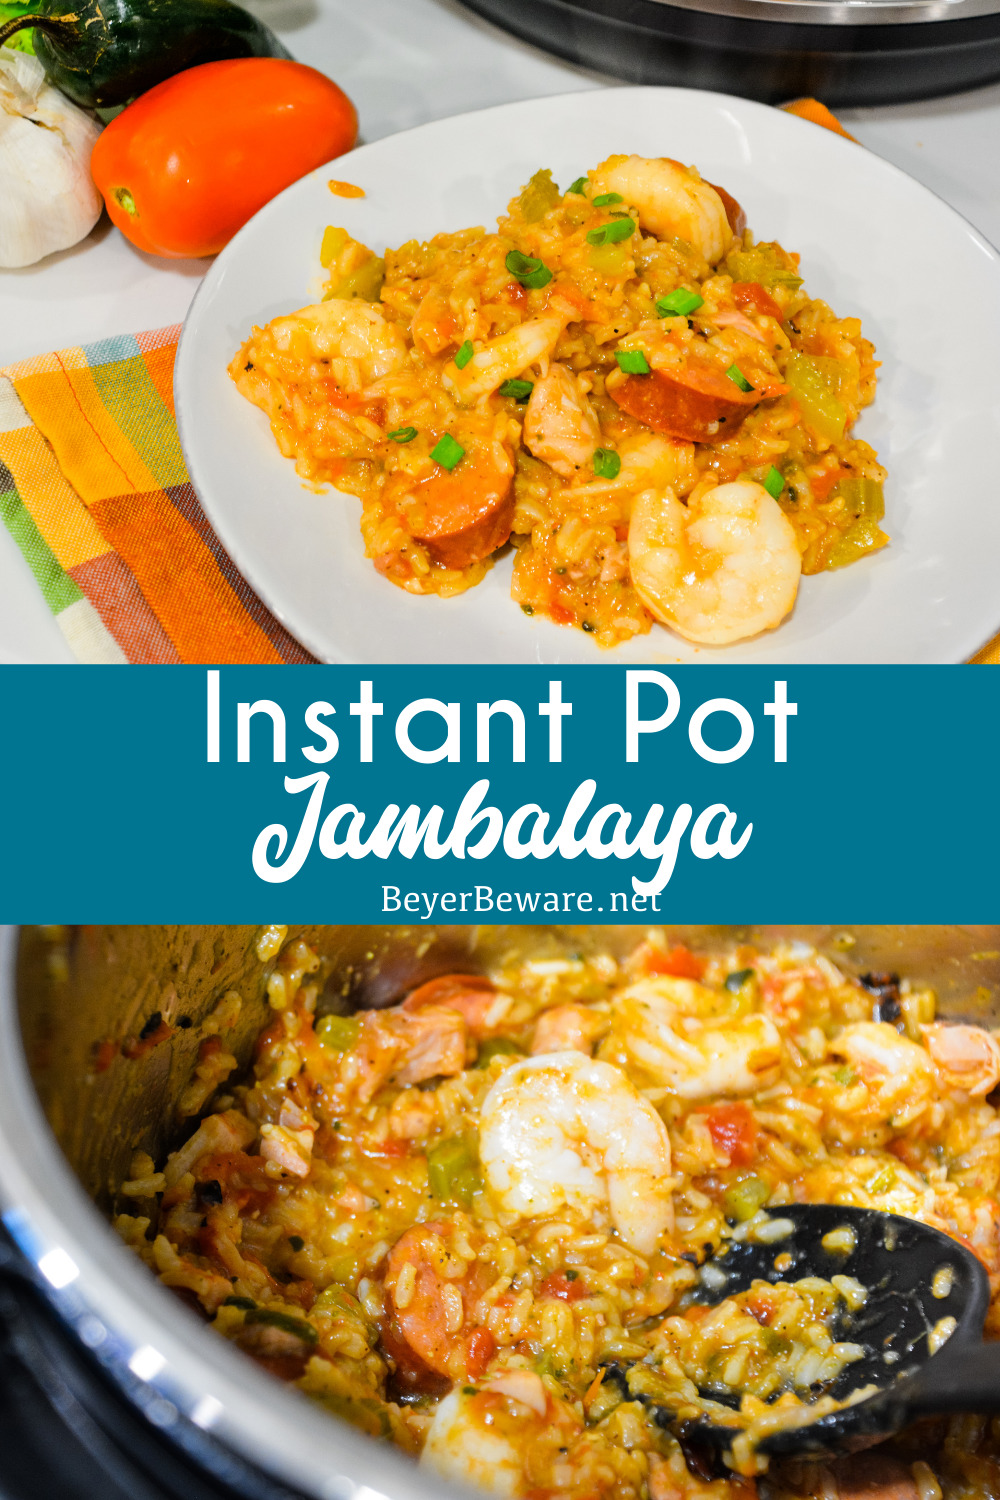 Instant Pot Jambalaya is a quick cajun recipe with spicy andouille sausage, chicken, shrimp, and rice pressure cooked in onions, celery, peppers, garlic, tomatoes, and creole seasonings.